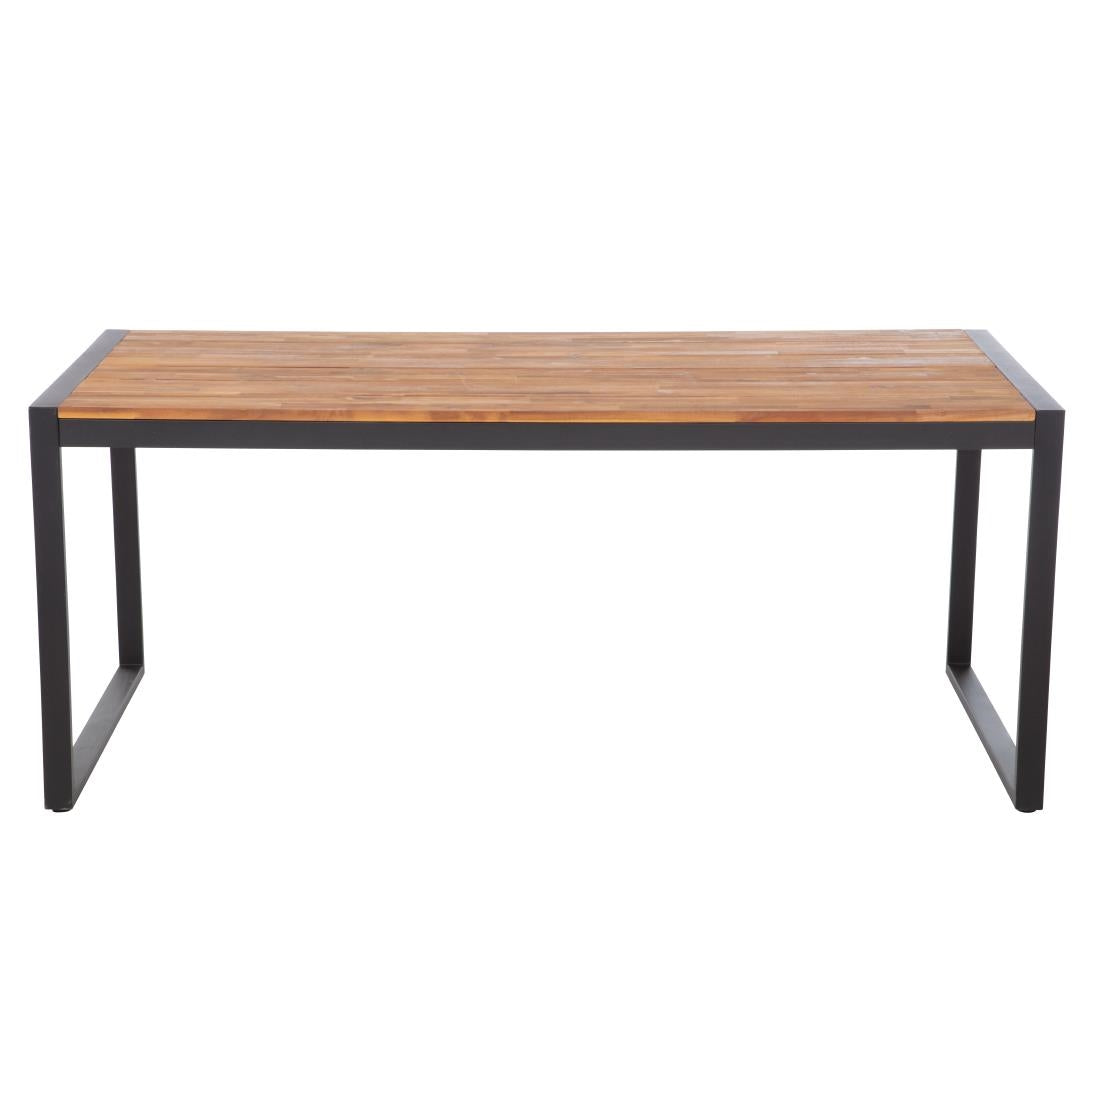 Bolero Acacia Wood and Steel Rectangular Industrial Table 1800mm JD Catering Equipment Solutions Ltd